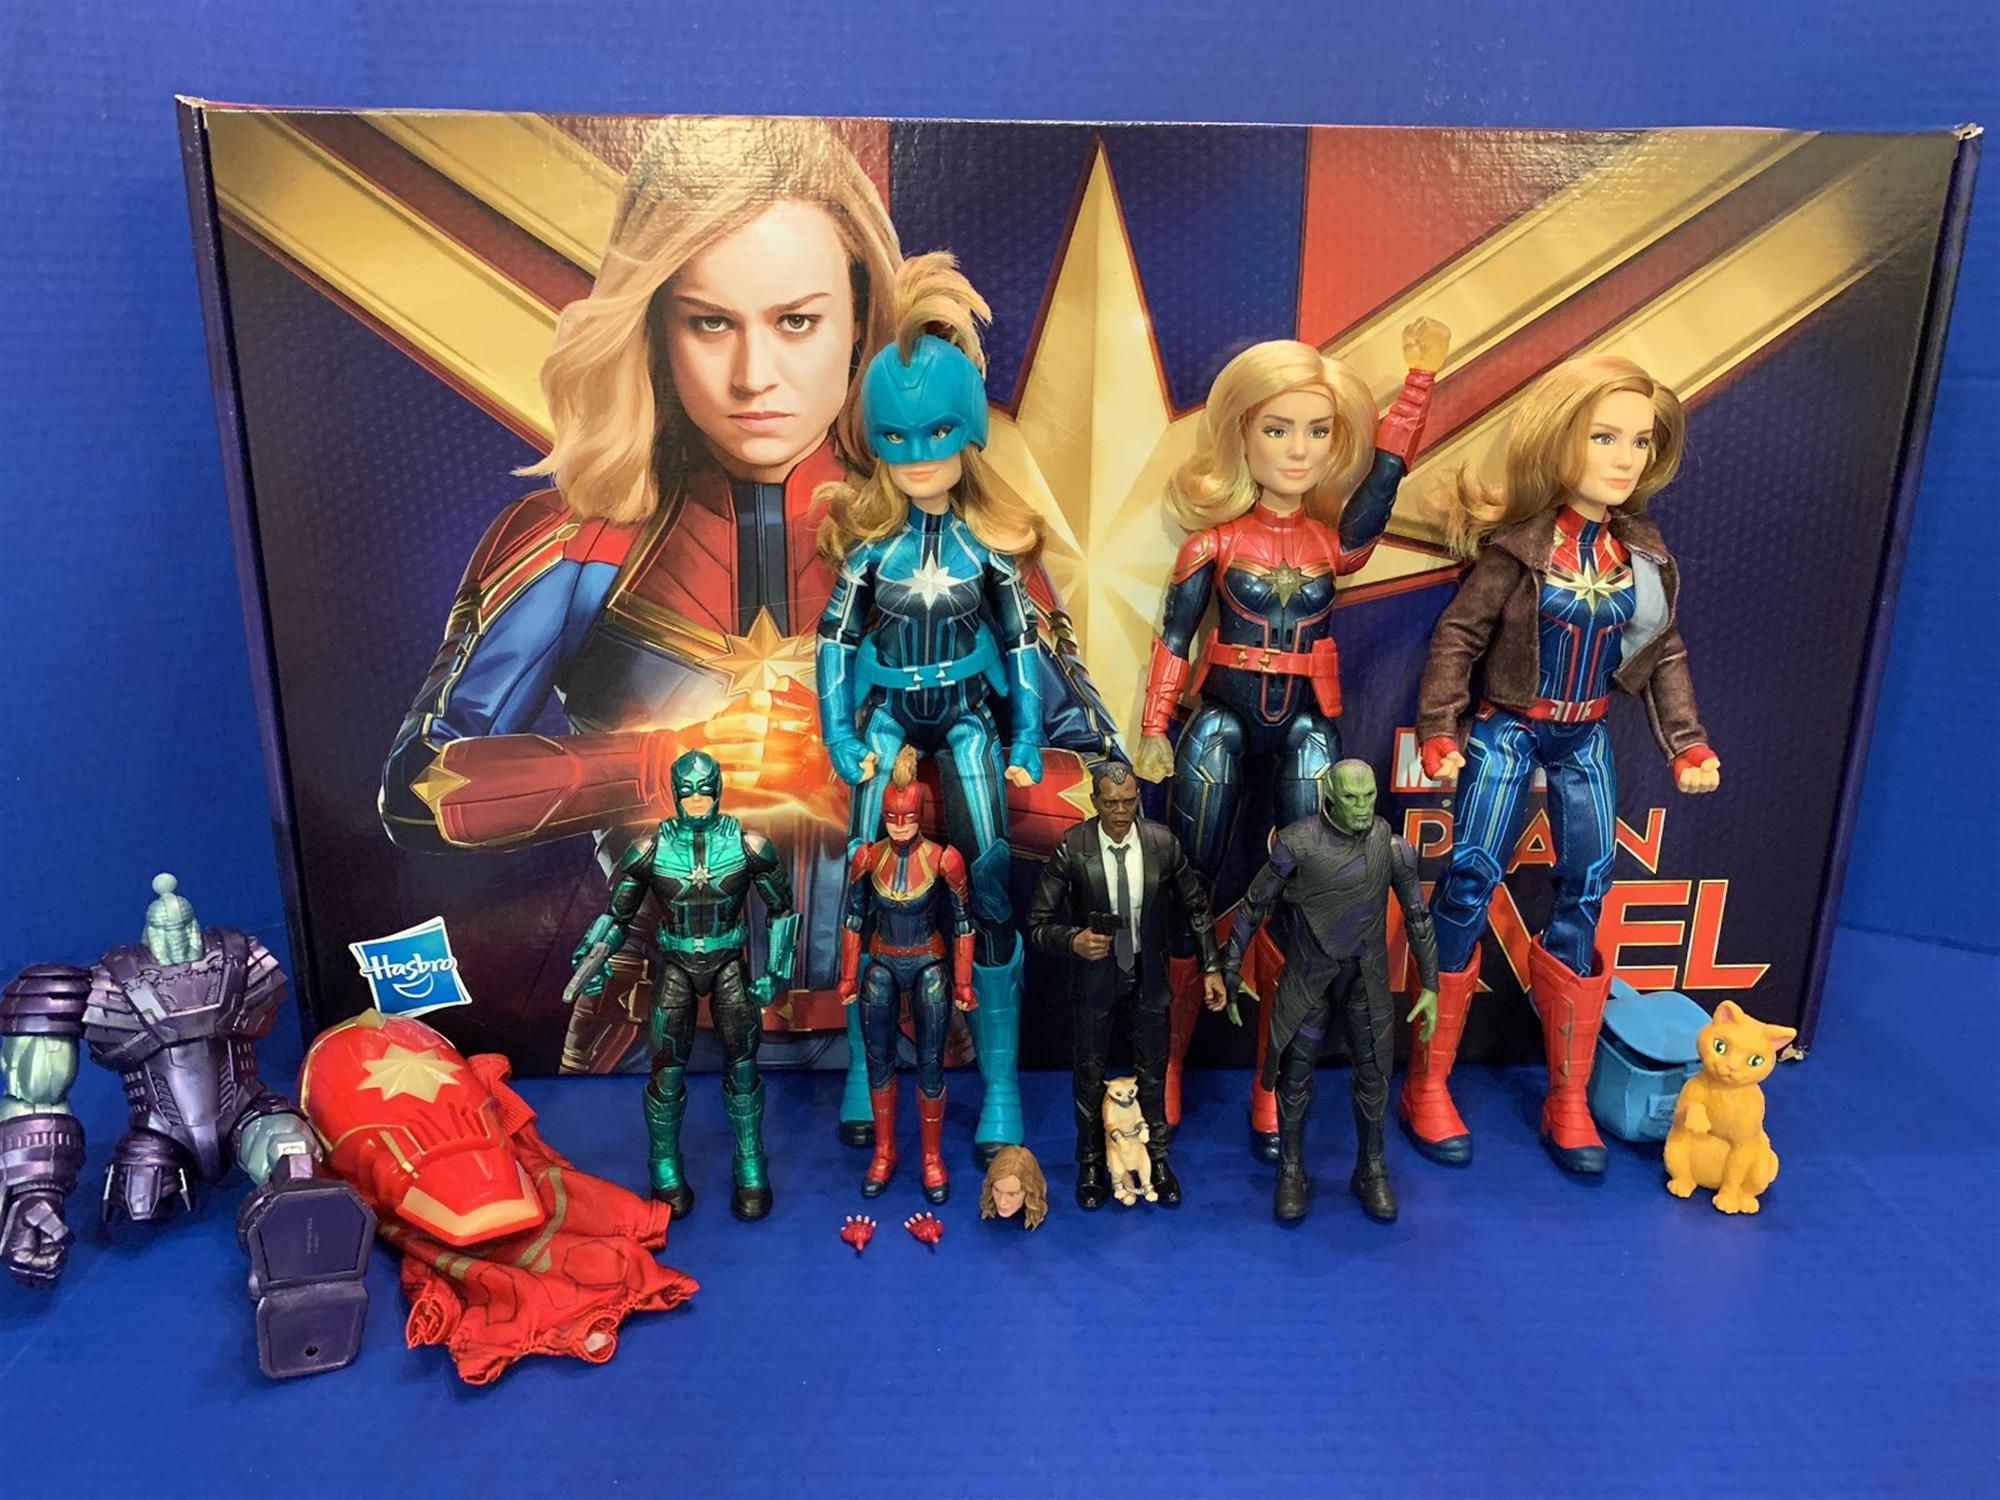 https://www.laughingplace.com/w/wp-content/uploads/2019/03/toy-review-captain-marvel-by-hasbro-marvel-legends-and-dolls-1.jpeg